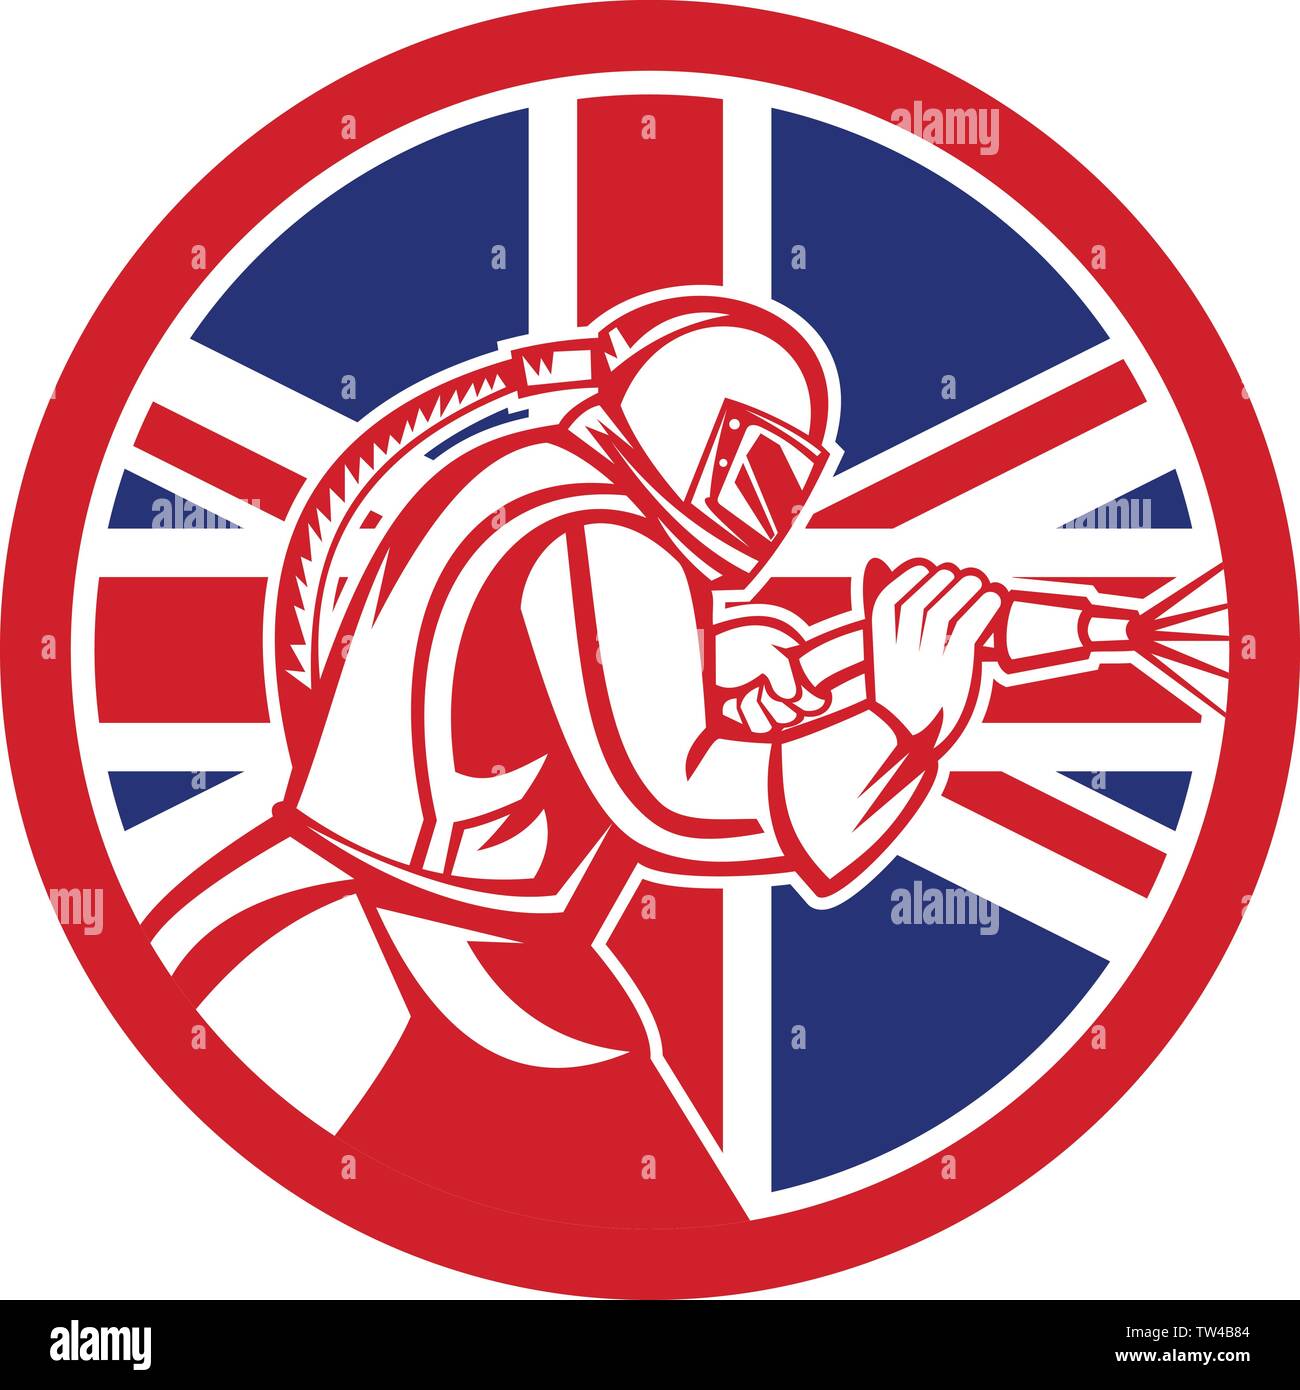 Mascot icon illustration of a British sandblaster or sand blaster abrasive blasting viewed from side set inside circle with Union Jack flag on isolate Stock Vector